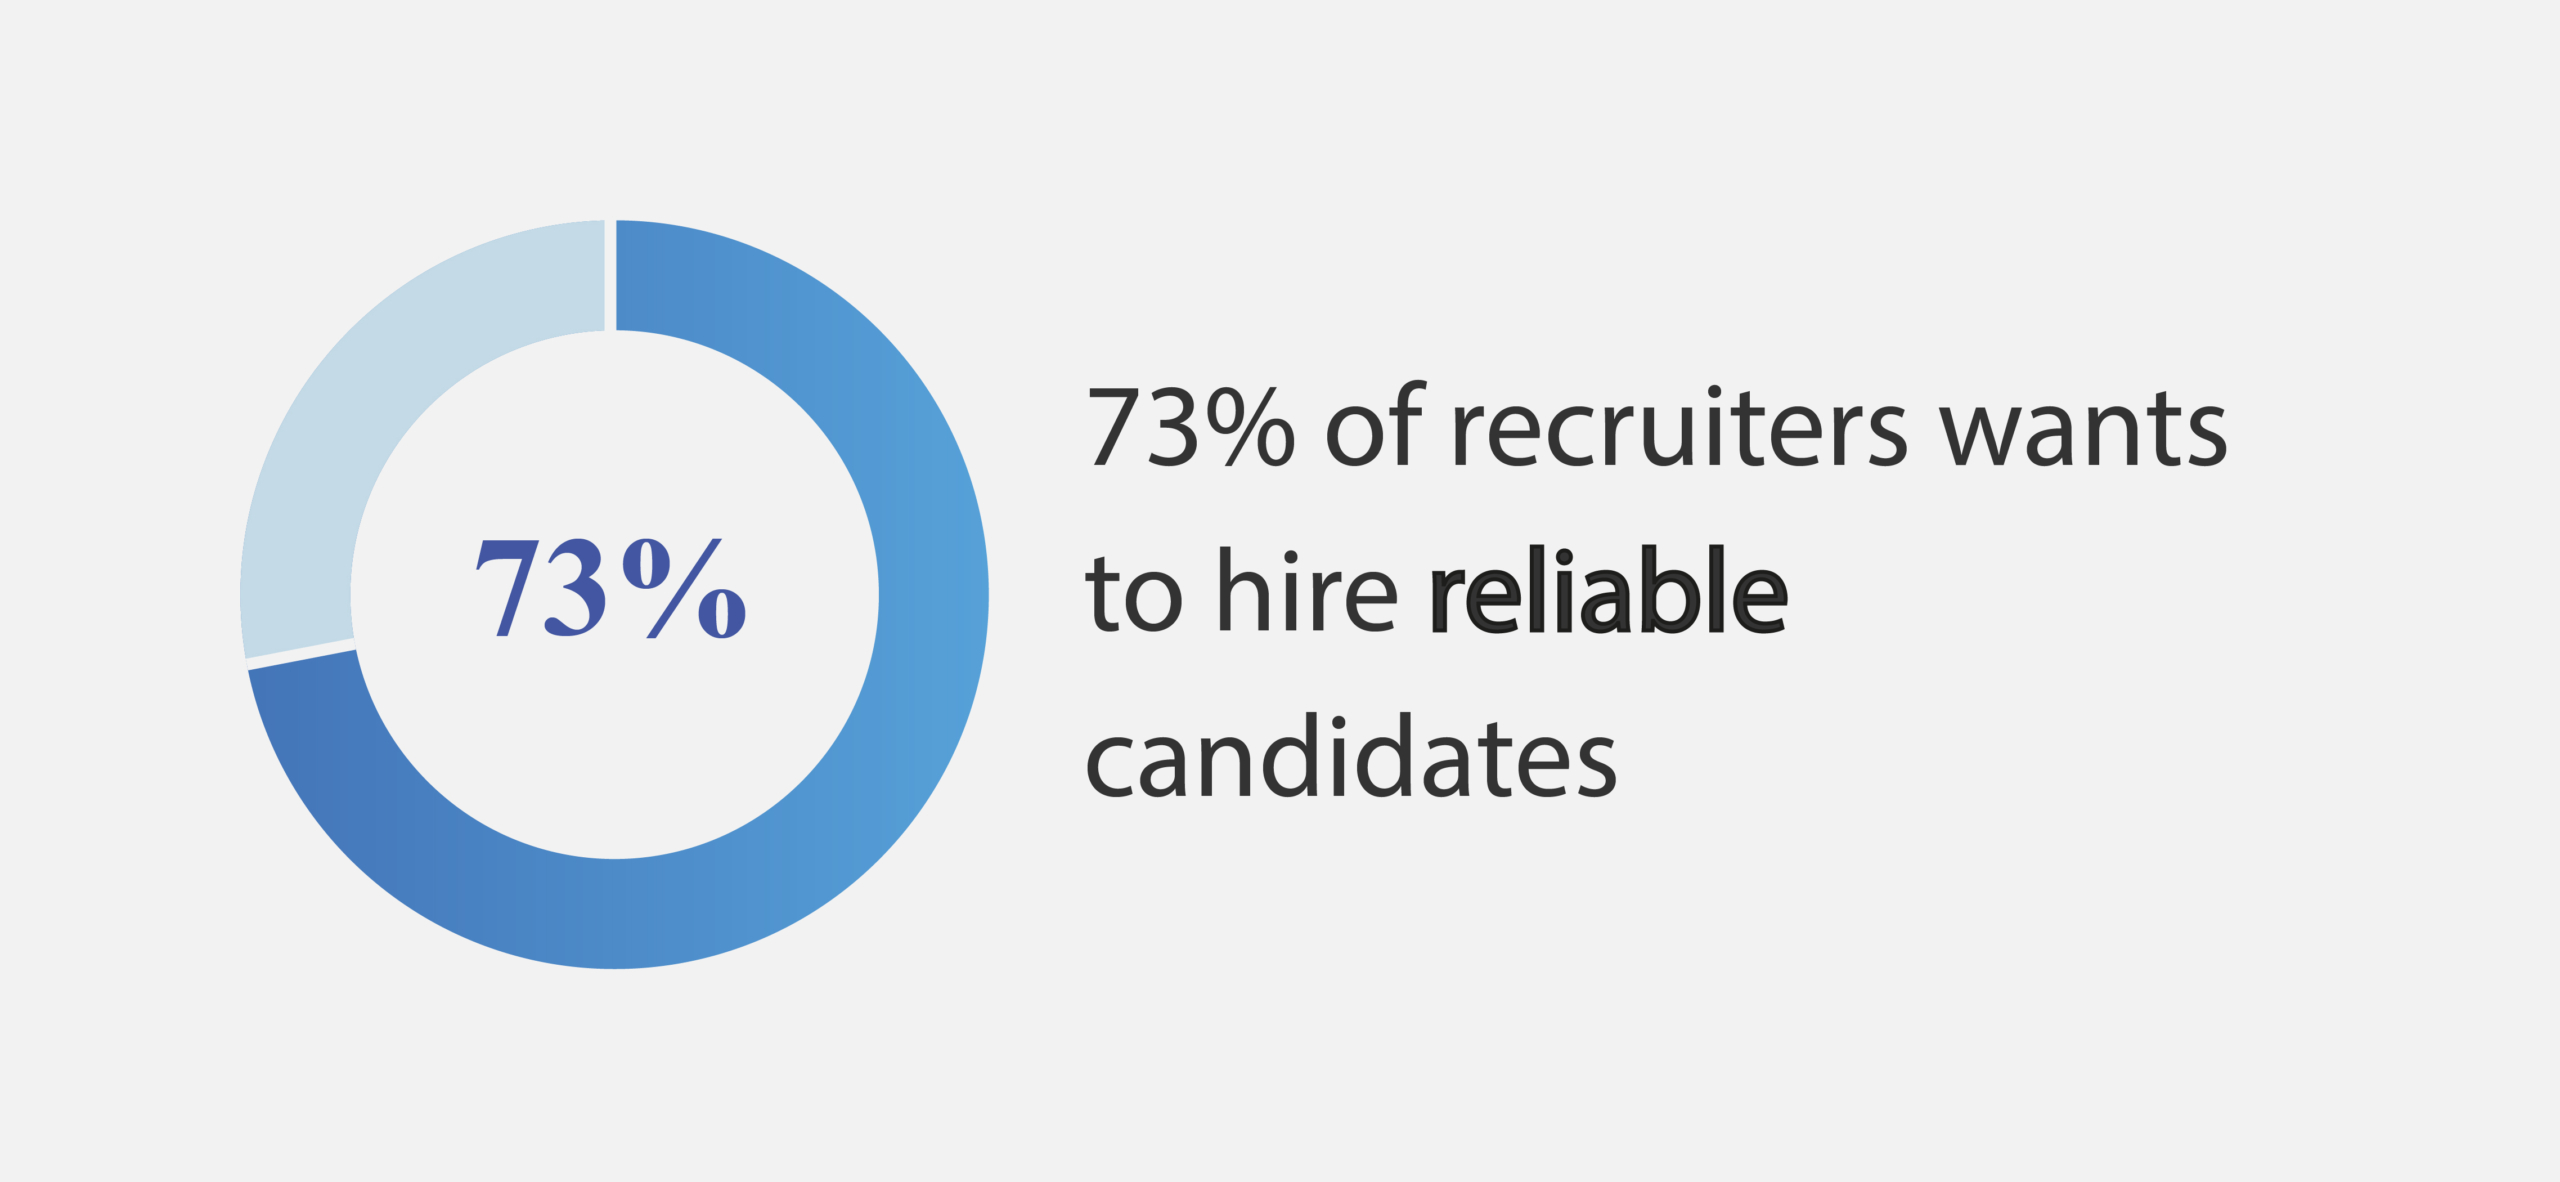 73% of recruiters want to hire reliable candidates